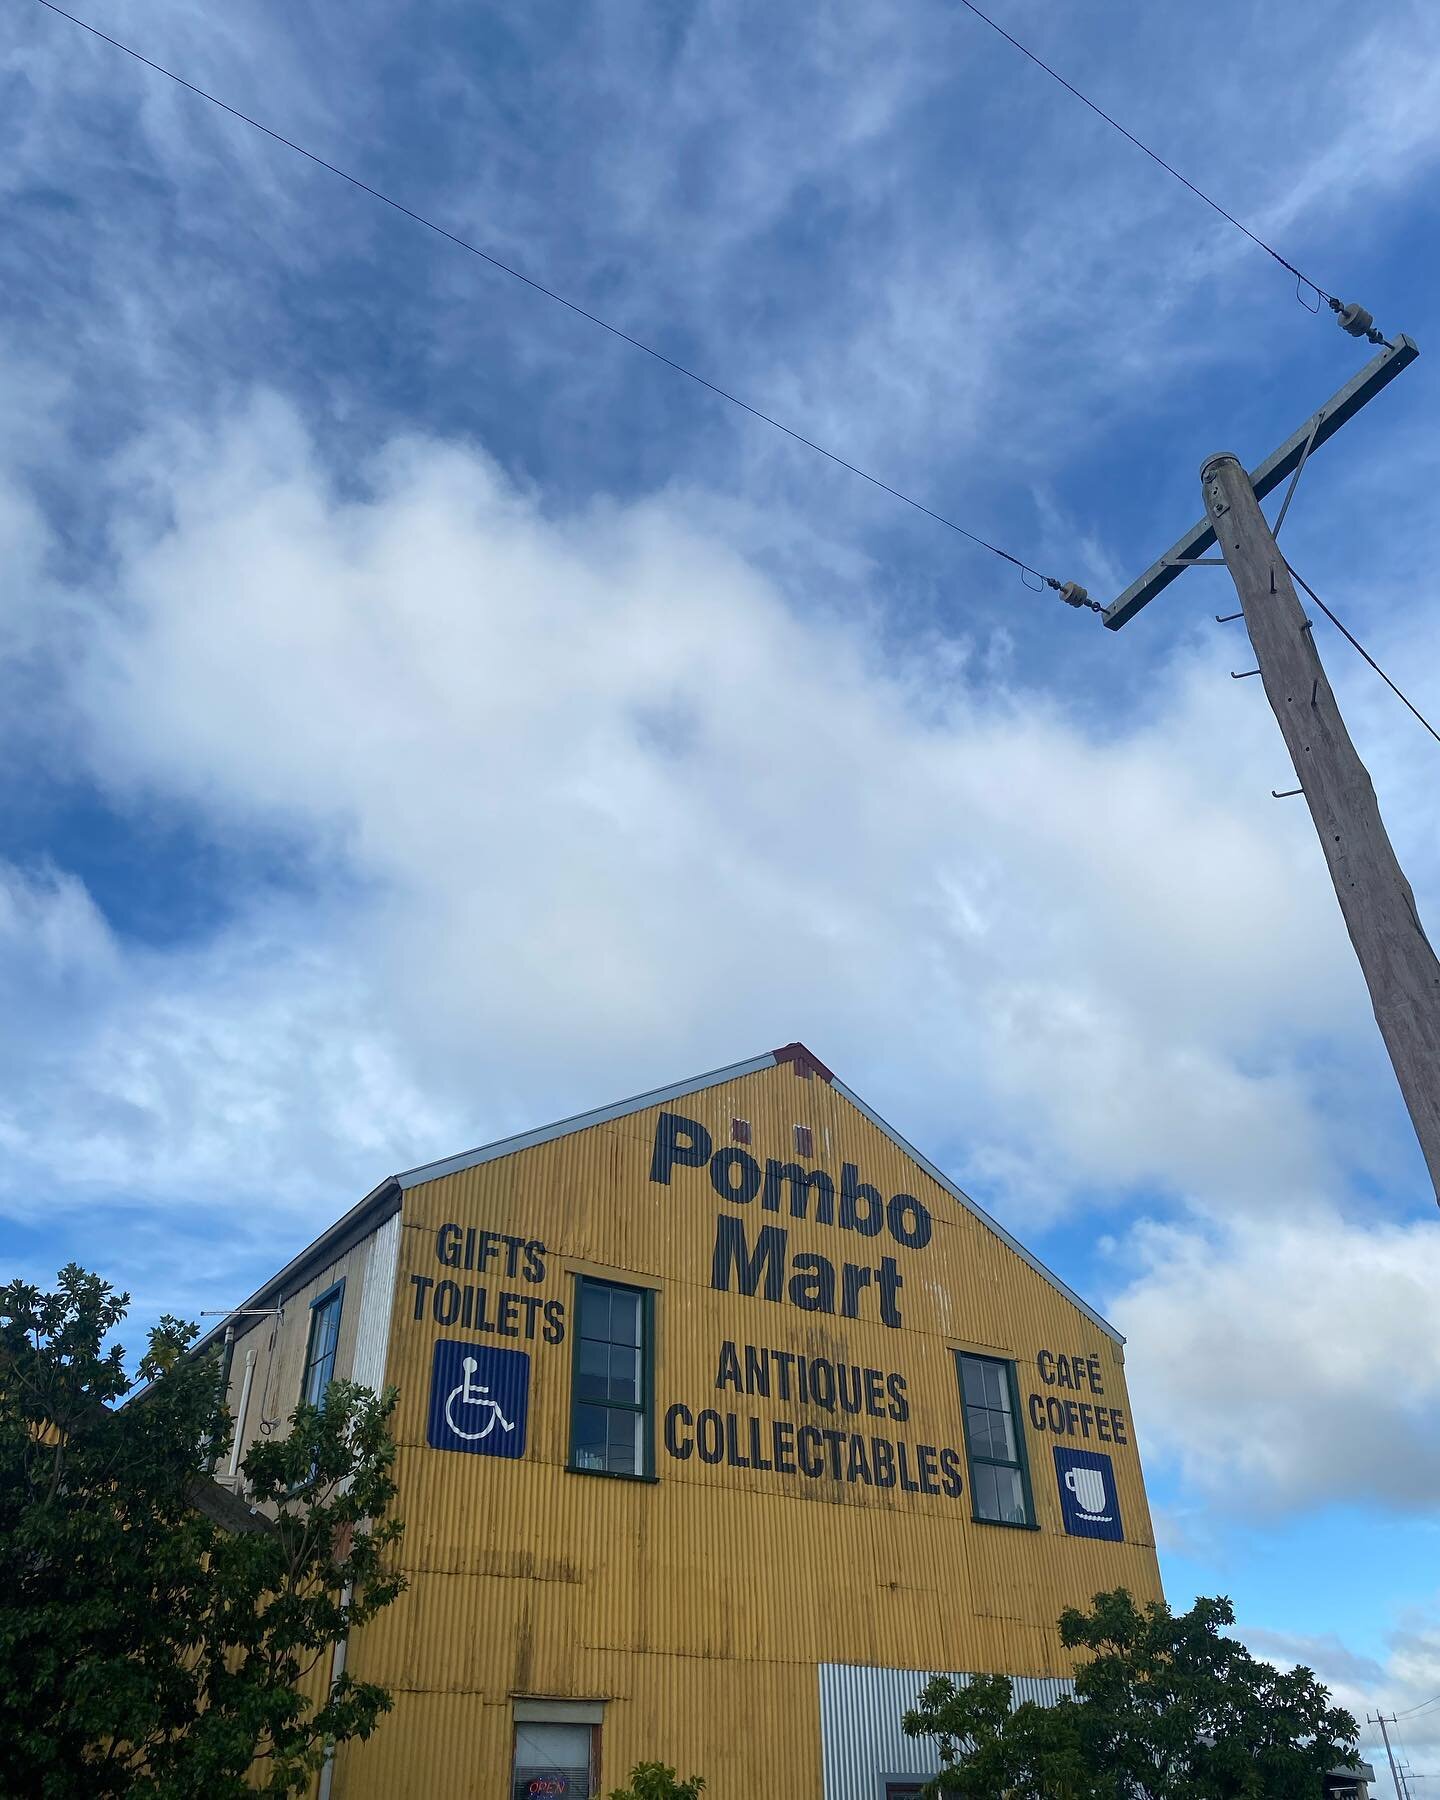 1. Antiques pitstop 
2. Met a race winner at the pub
3. Winter Weekending
4. Last Leaves
5. Franklin No Frills aka The Smallgoods
6. Dreams of being a lighthouse keeper
7. Small spoils from the Pombo Mart

#PortFairy #WinterWeekends #LostAndLonesome 